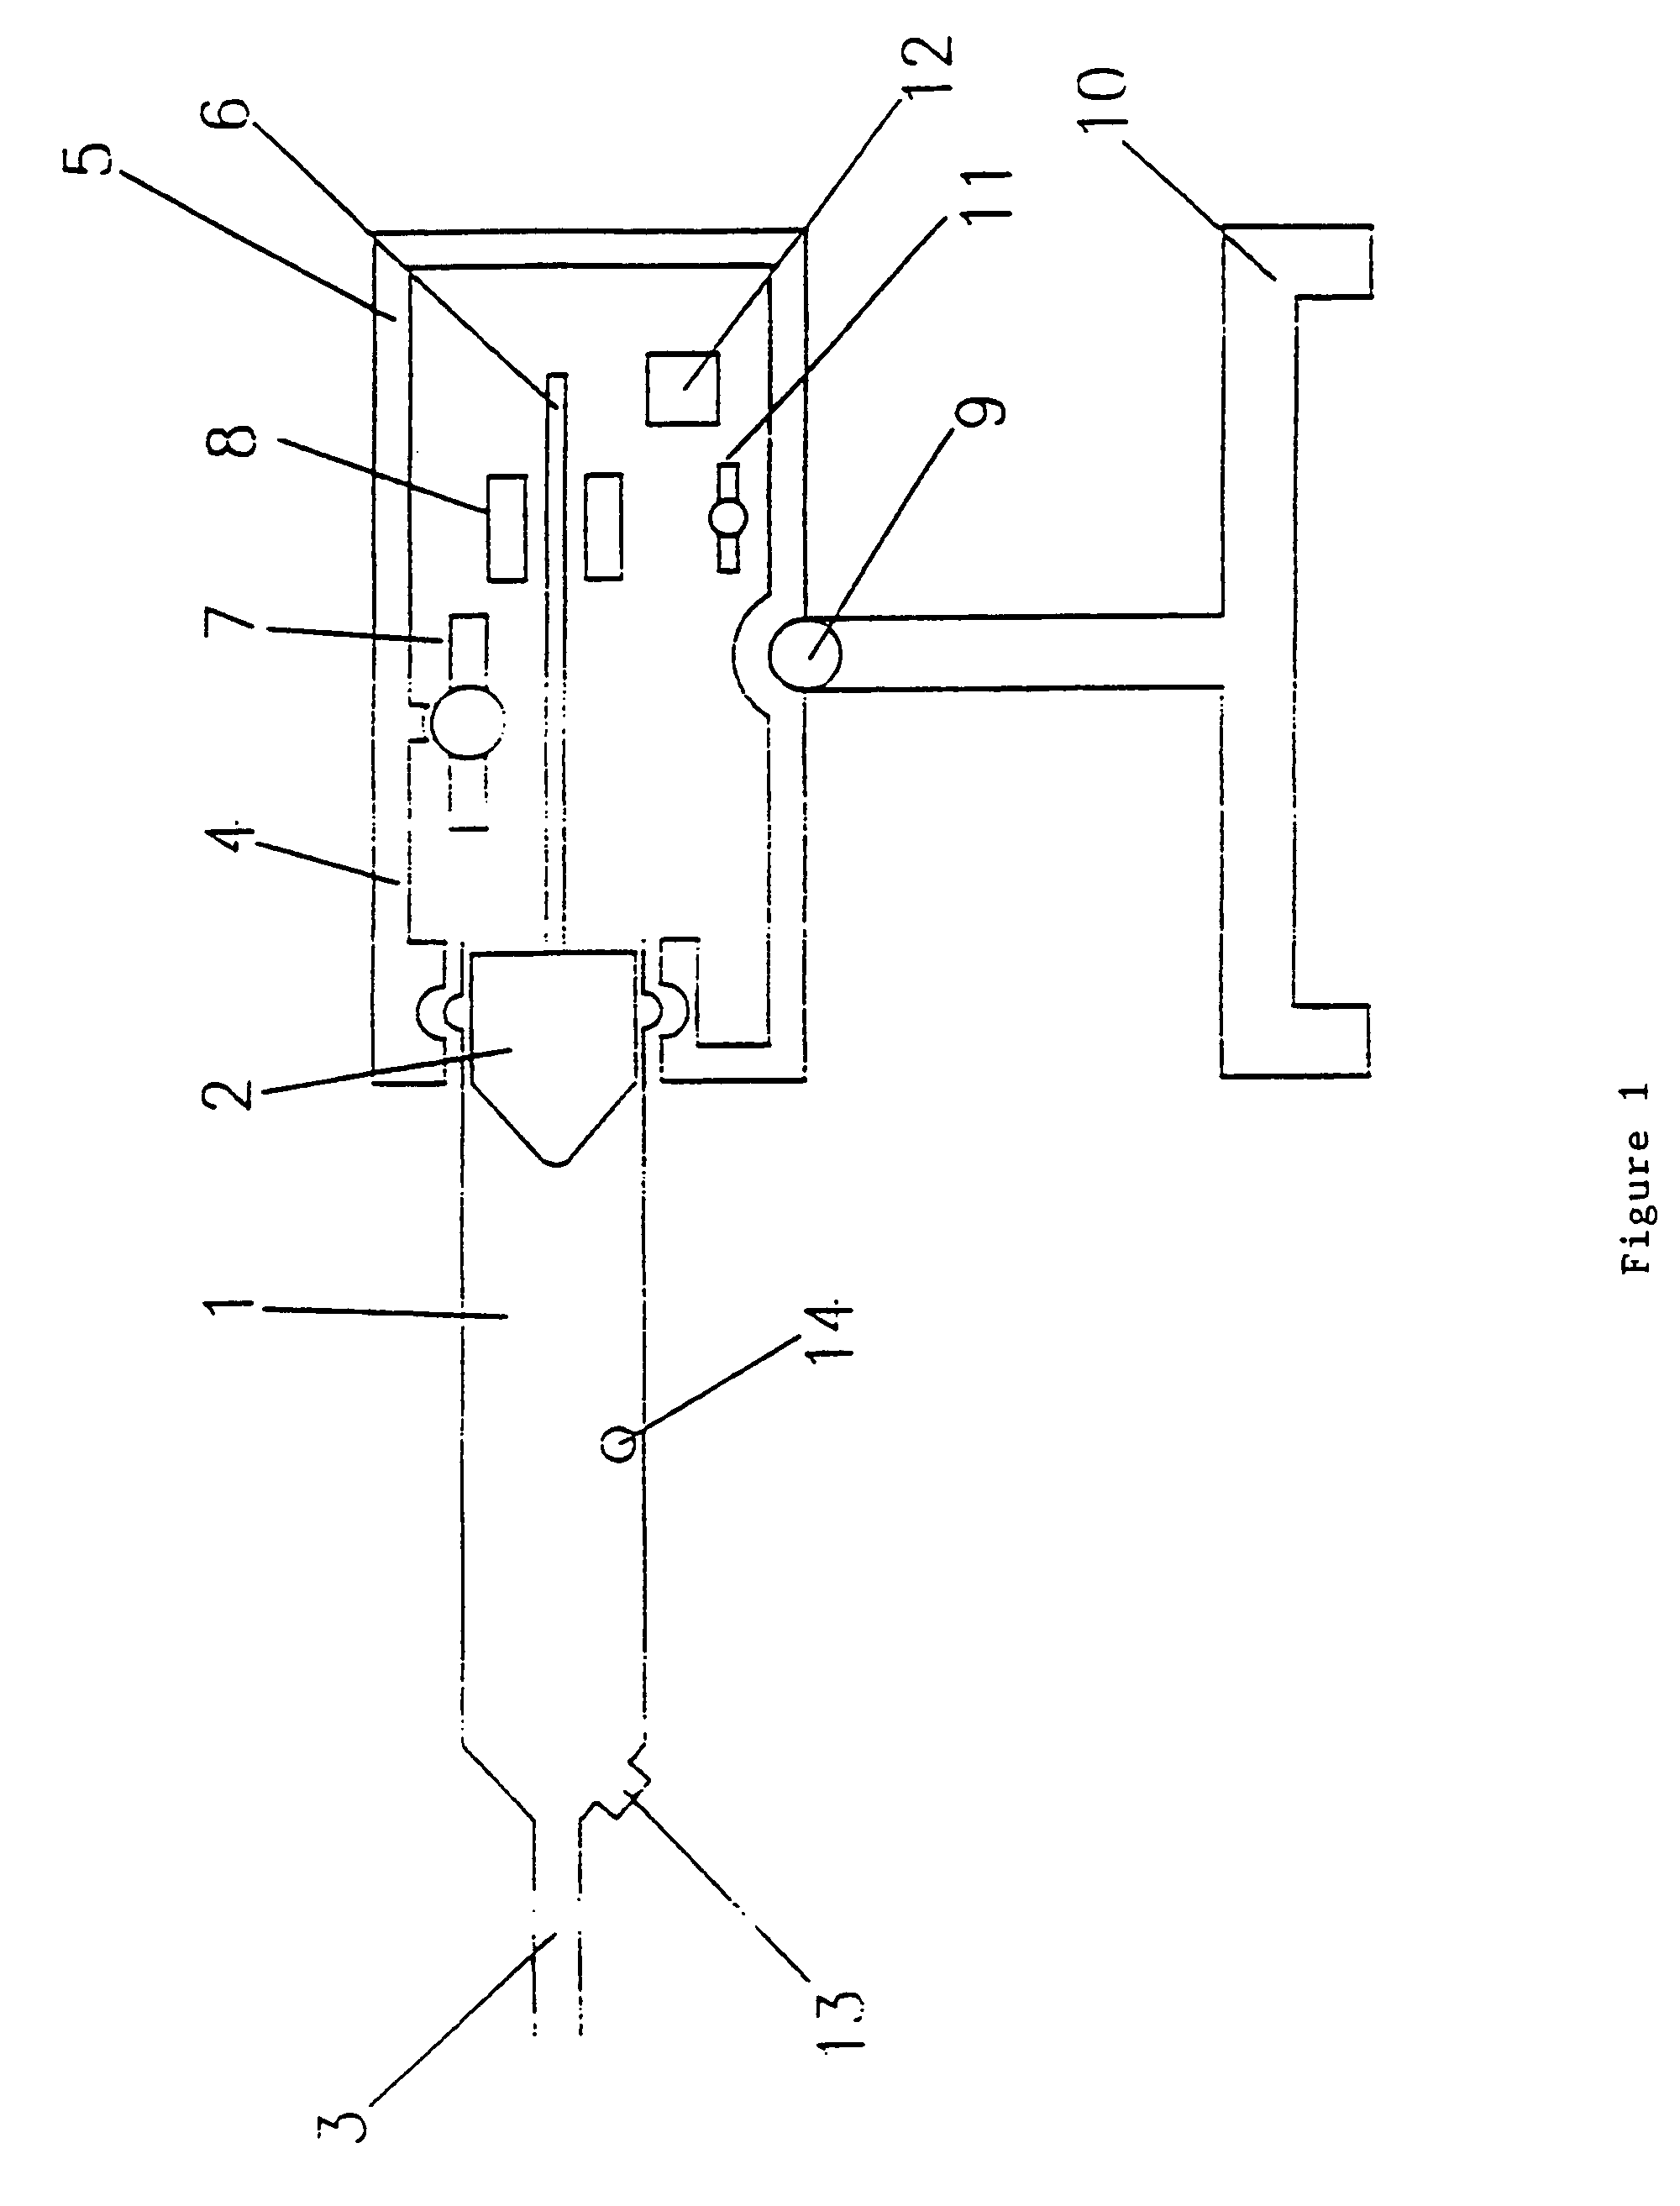 Syringes and injectors incorporating mechanical fluid agitation devices